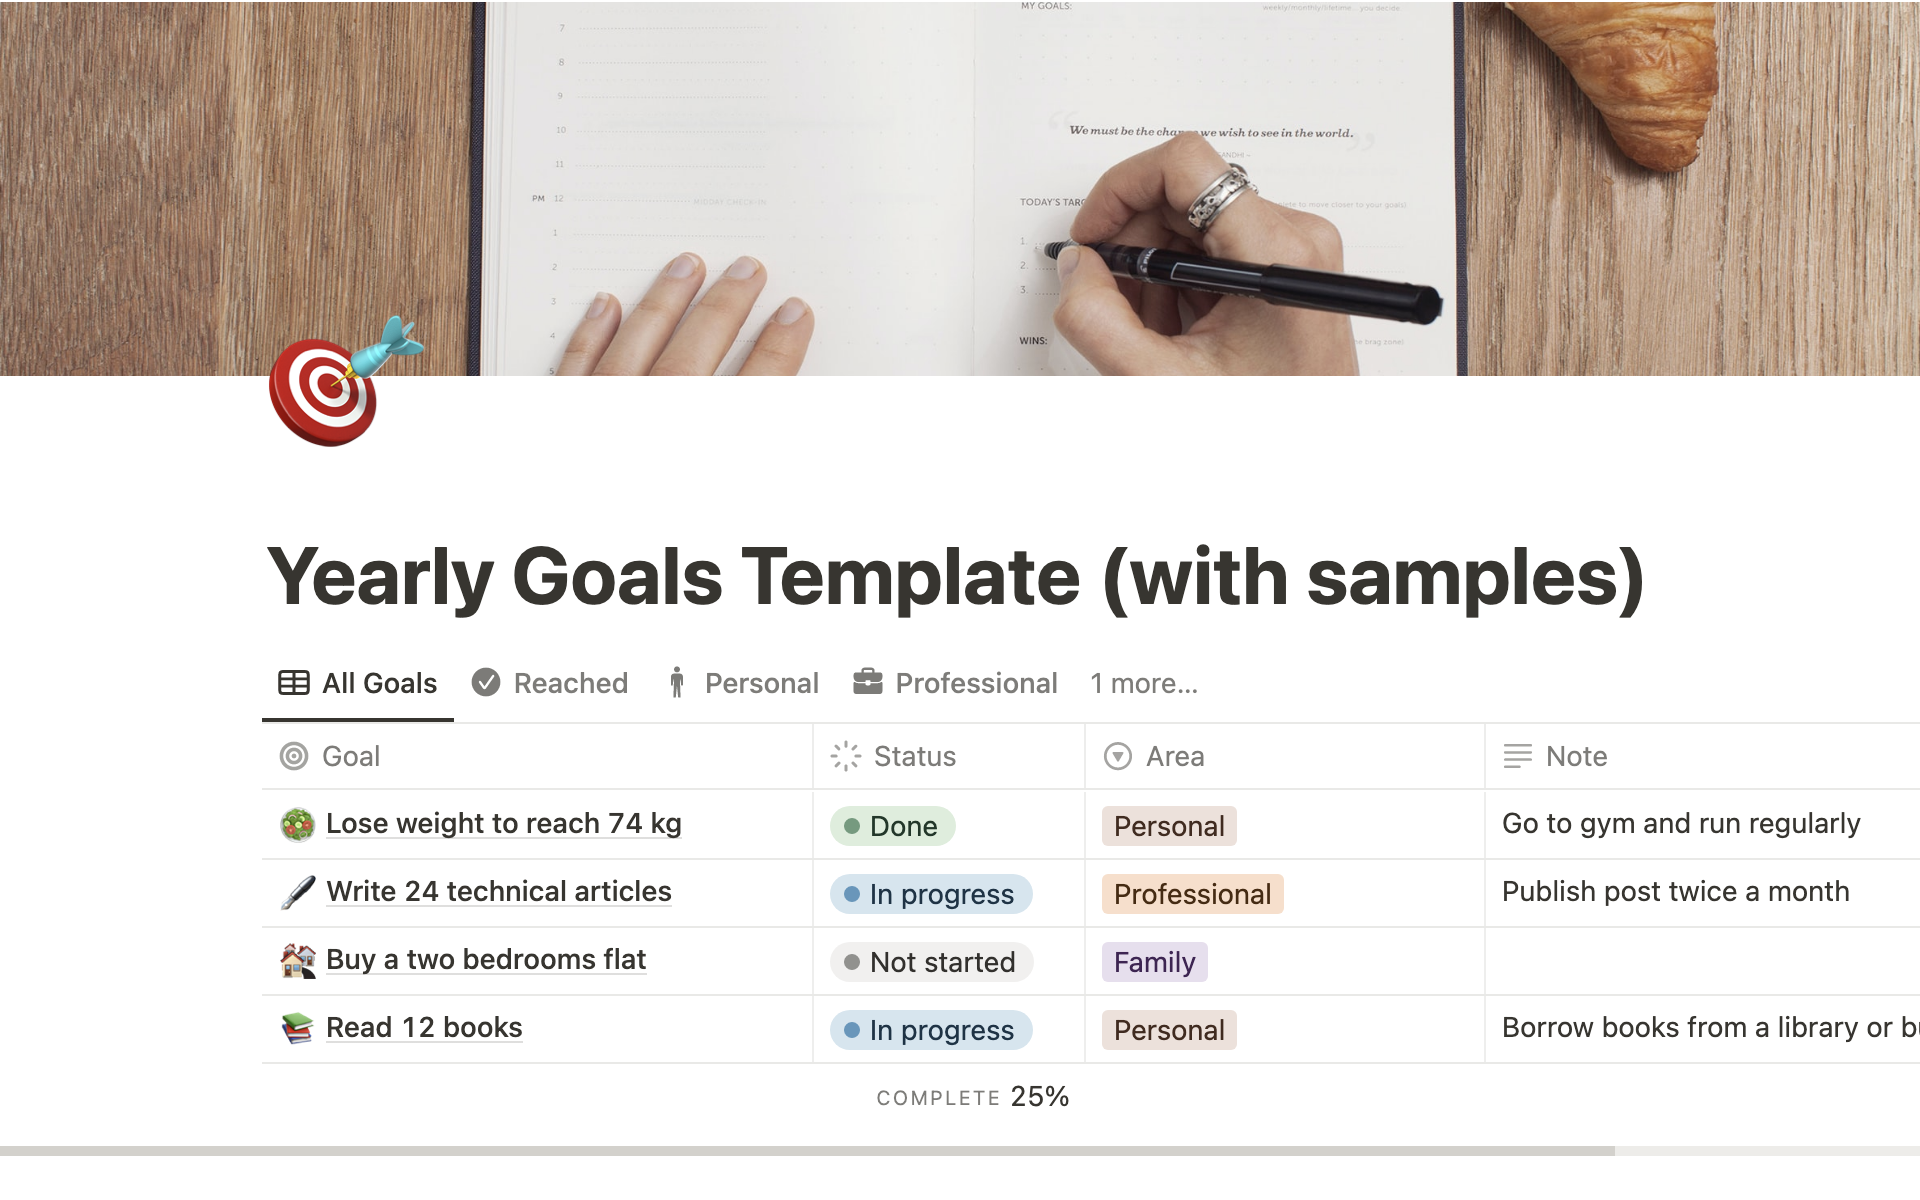 It is a template with sample data to help you achieve your yearly goals.